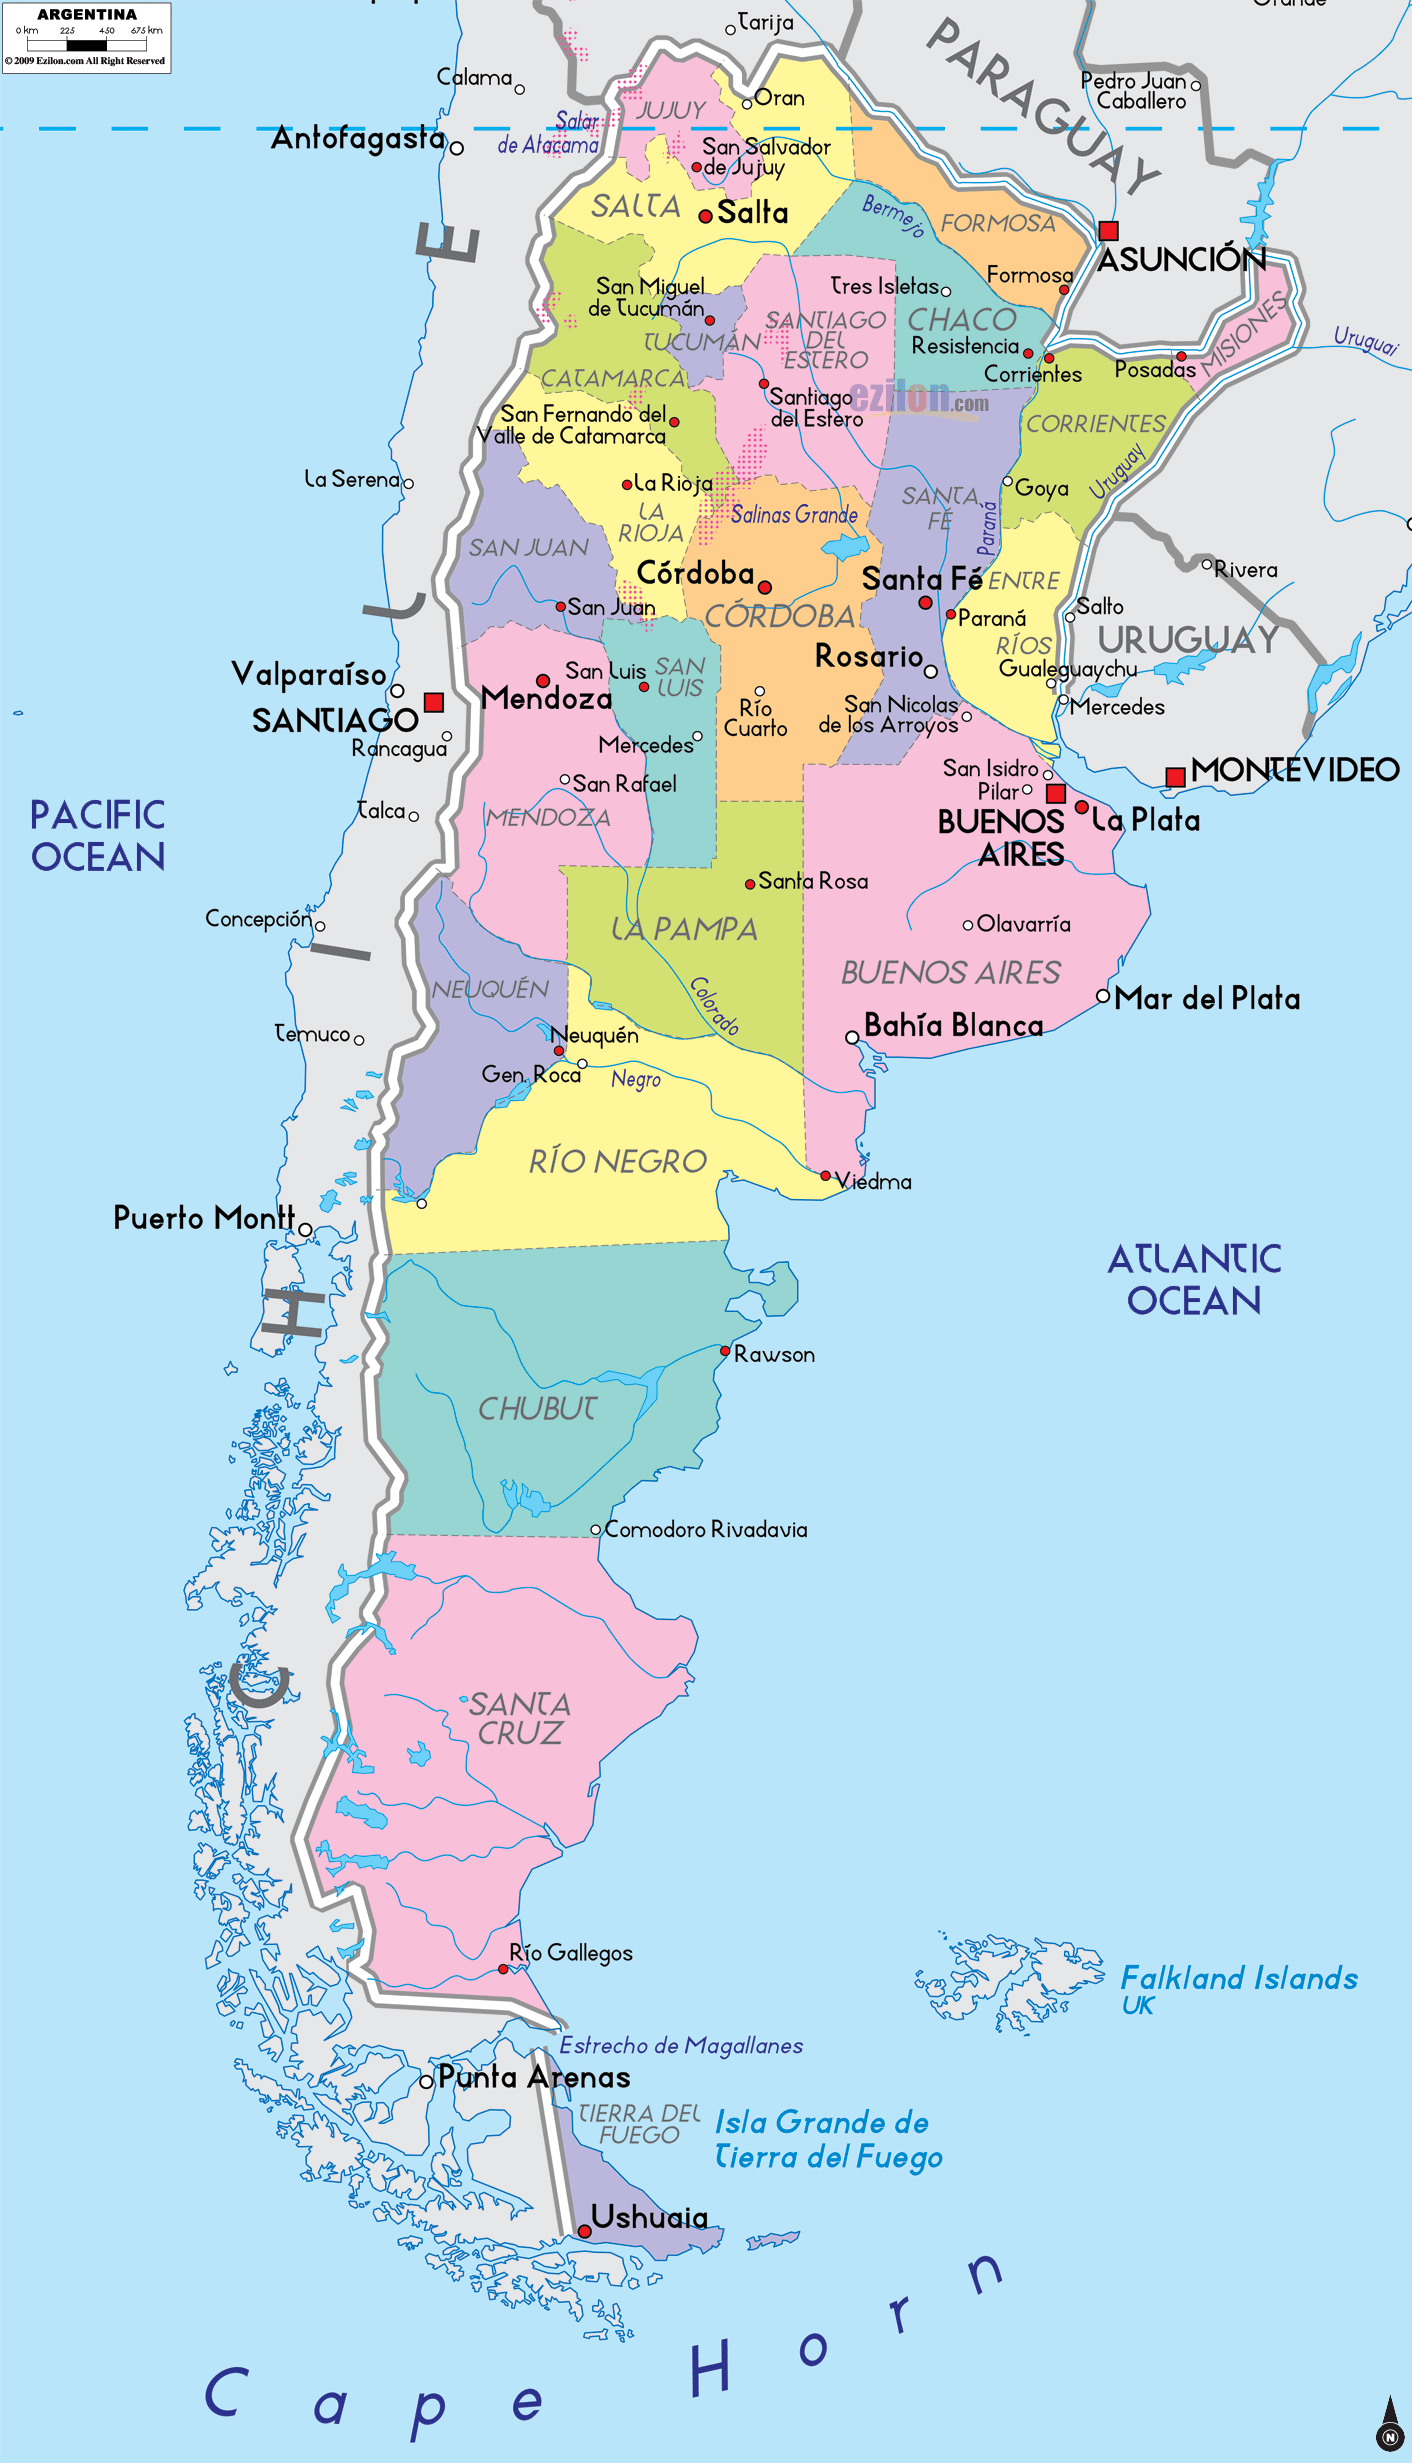 These United Provinces: An Argentine TL | alternatehistory.com